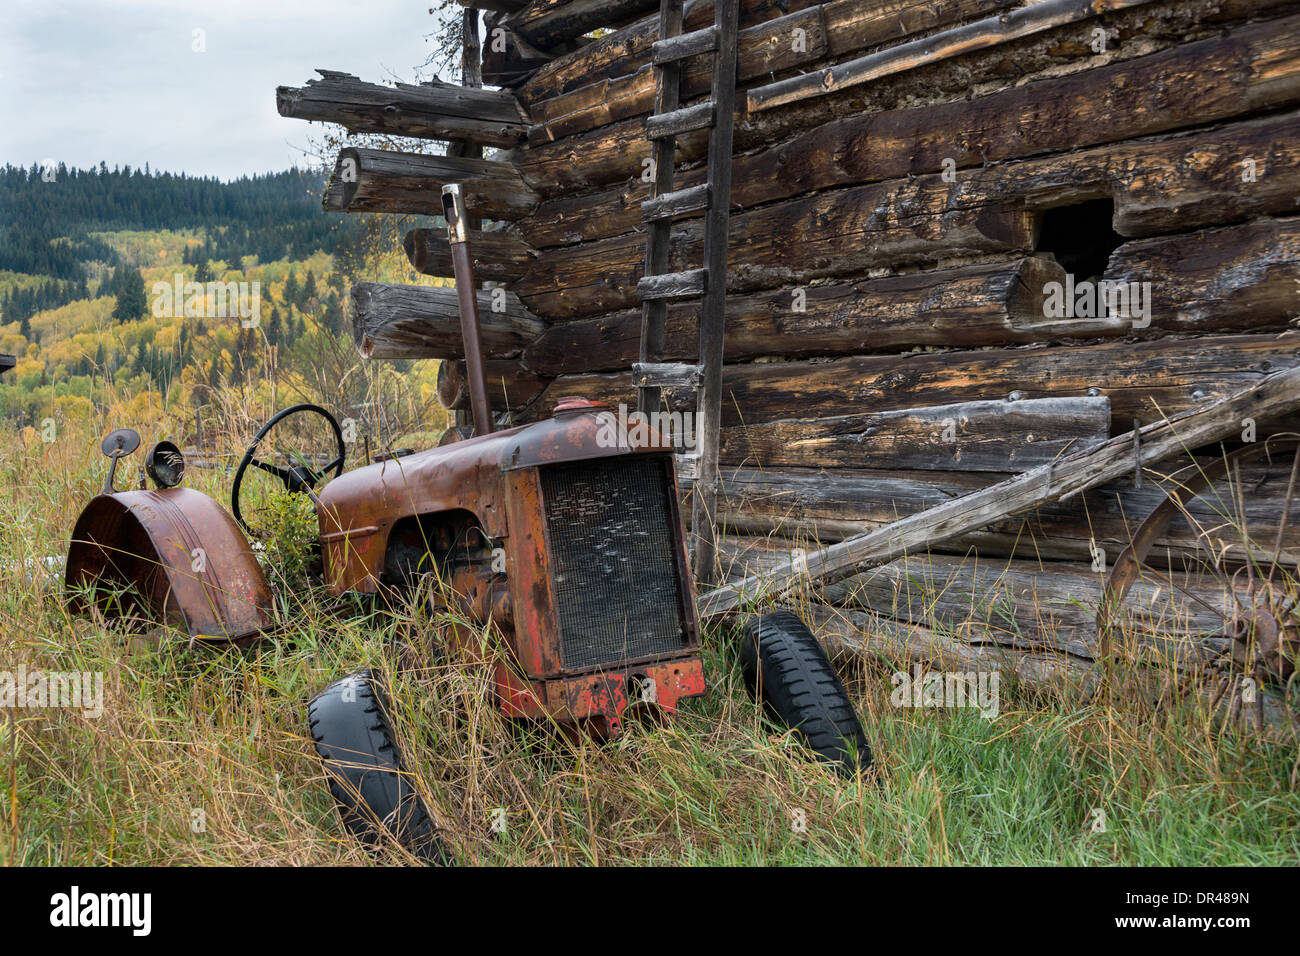 Old abandoned tractor by a log barn, on a farm near Likely, Cariboo-Chilcotin region, British Columbia Stock Photo